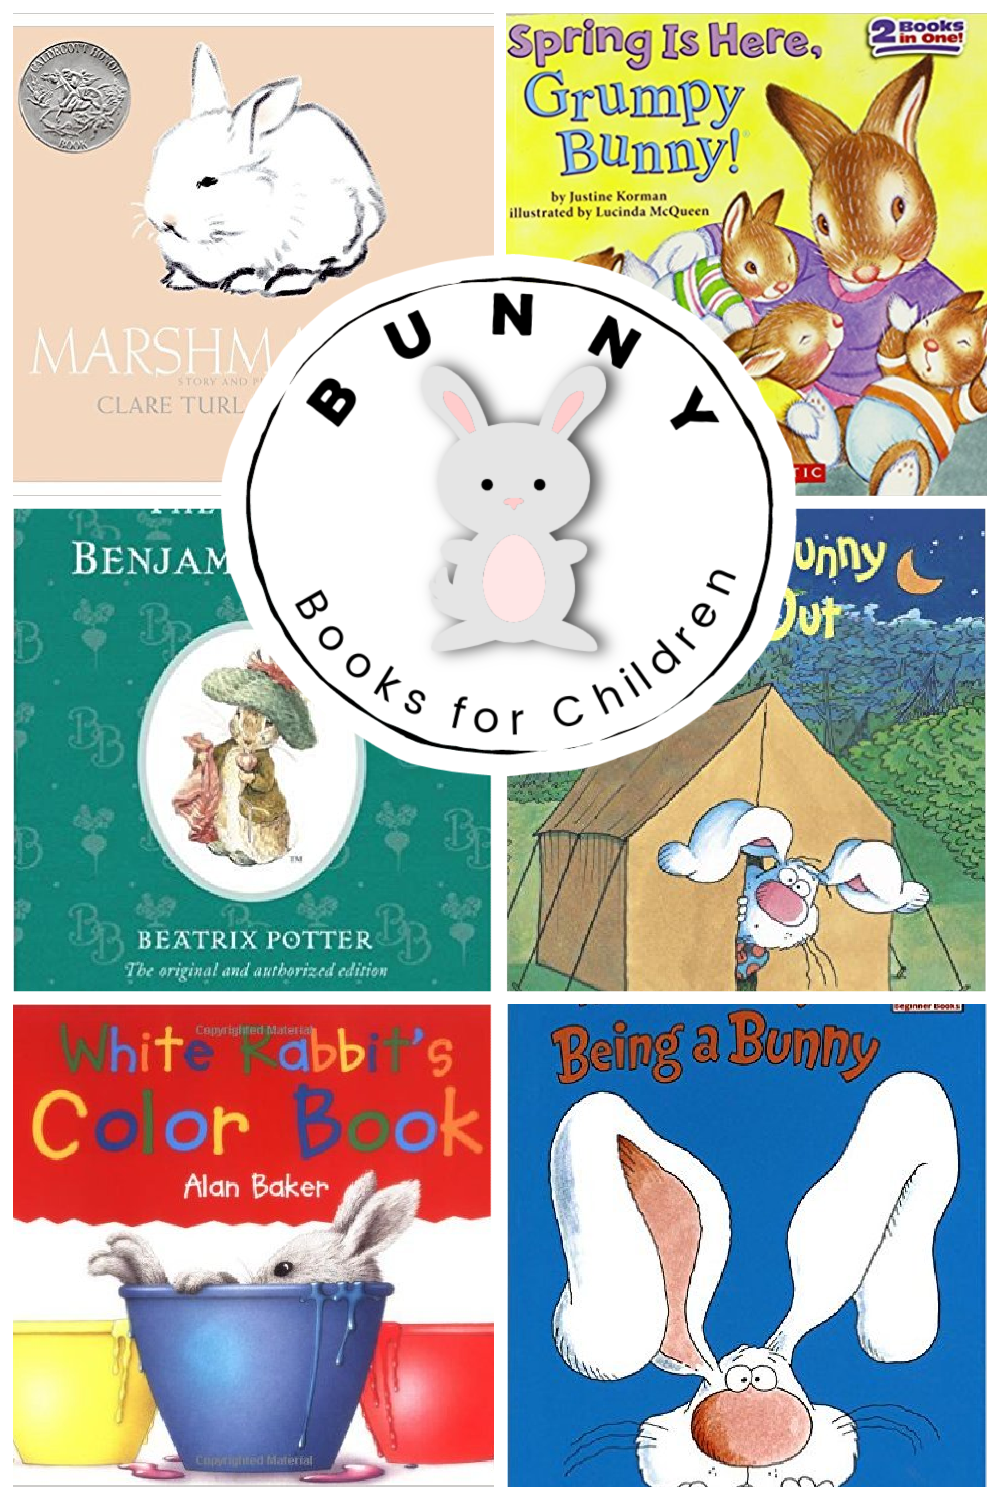 childrens-books-about-bunnies Children's Books About Bunnies